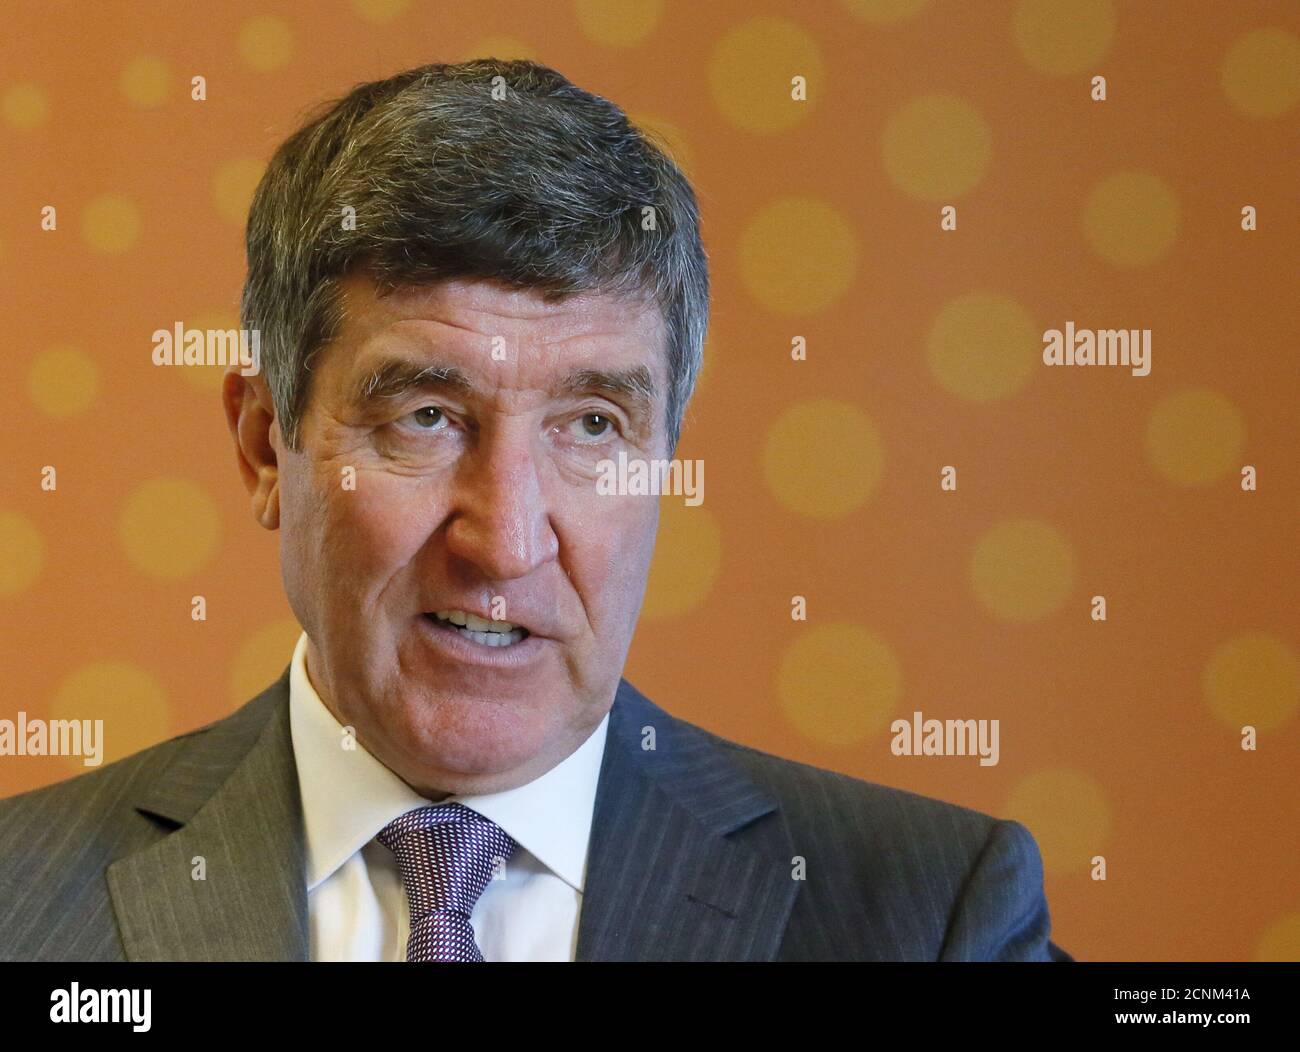 Yuri Shafranik, chairman of Russian energy company Soyuzneftegaz and former energy minister, speaks during an interview at the Reuters Russia Investment summit in Moscow, Russia, September 29, 2015. Russian energy firm Soyuzneftegaz has decided against plans to explore for oil and gas off Syria's coast because of the conflict there, Shafranik said on Tuesday. REUTERS/Maxim Shemetov Stock Photo